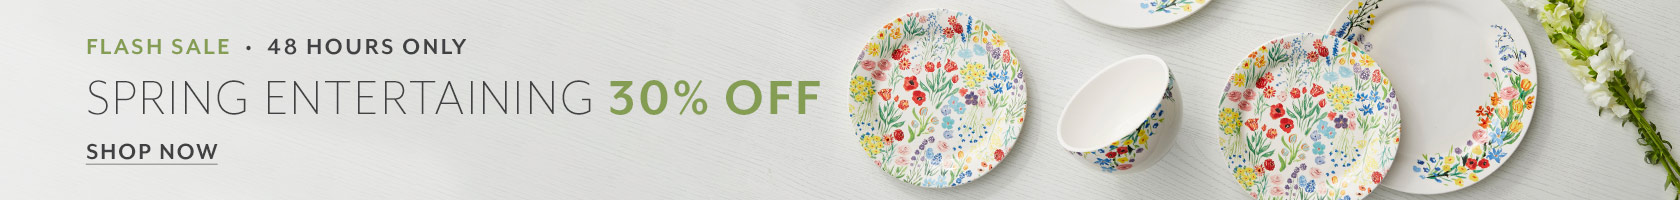 Flash Sale 48 hours only Spring Entertaining 30% off. Shop now.